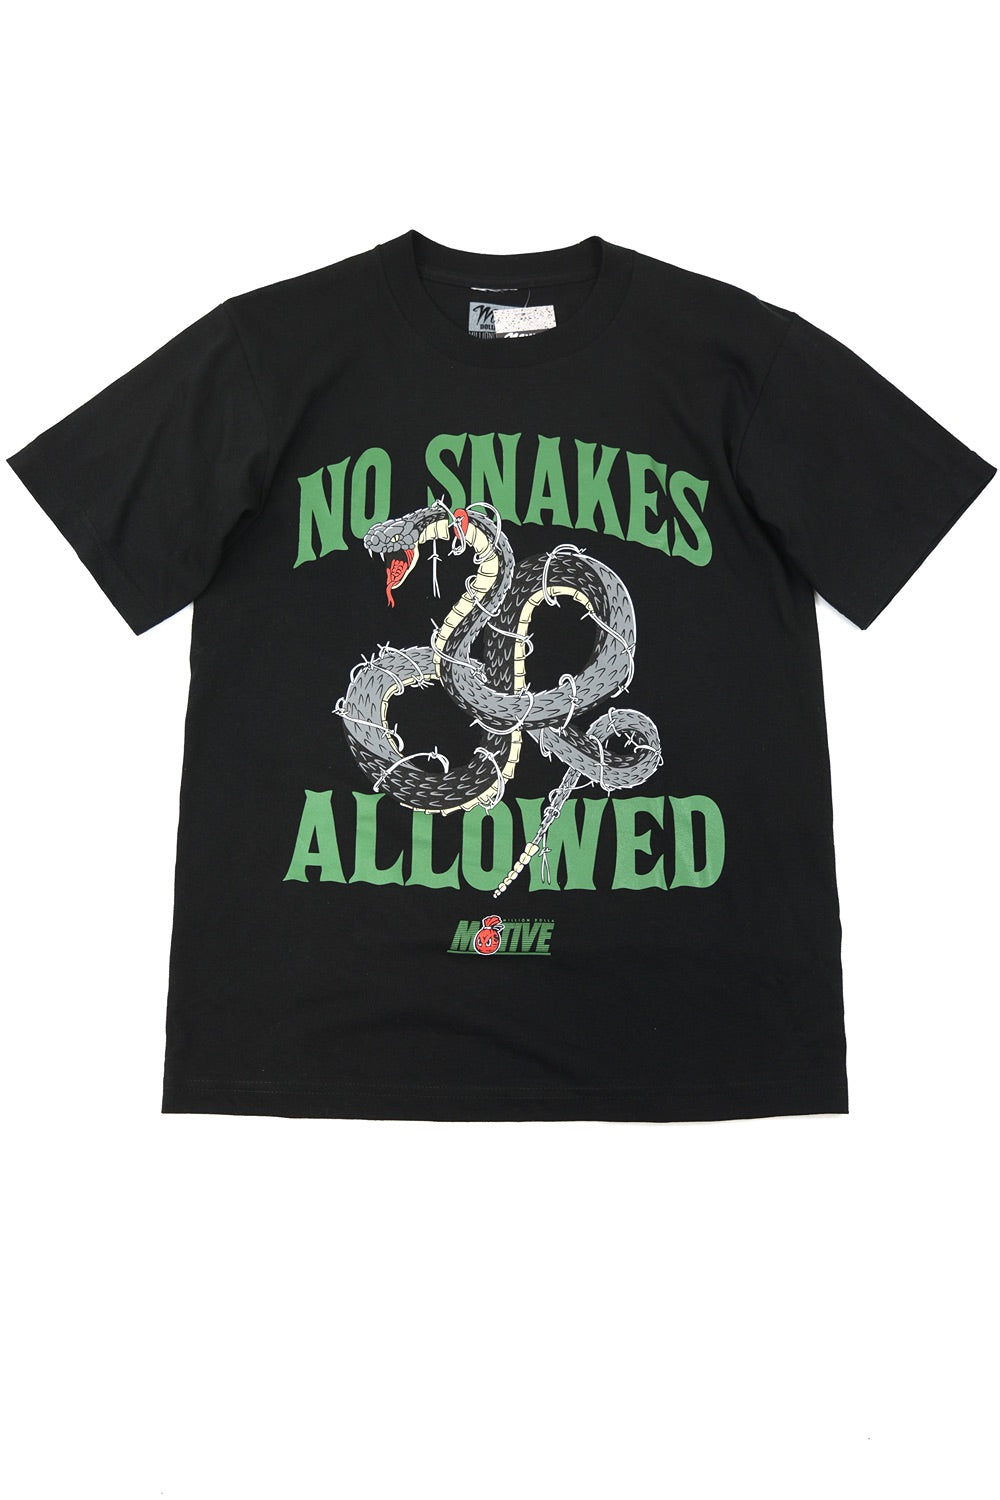 Graphic Tees - No Snakes Allowed - T - Shirts